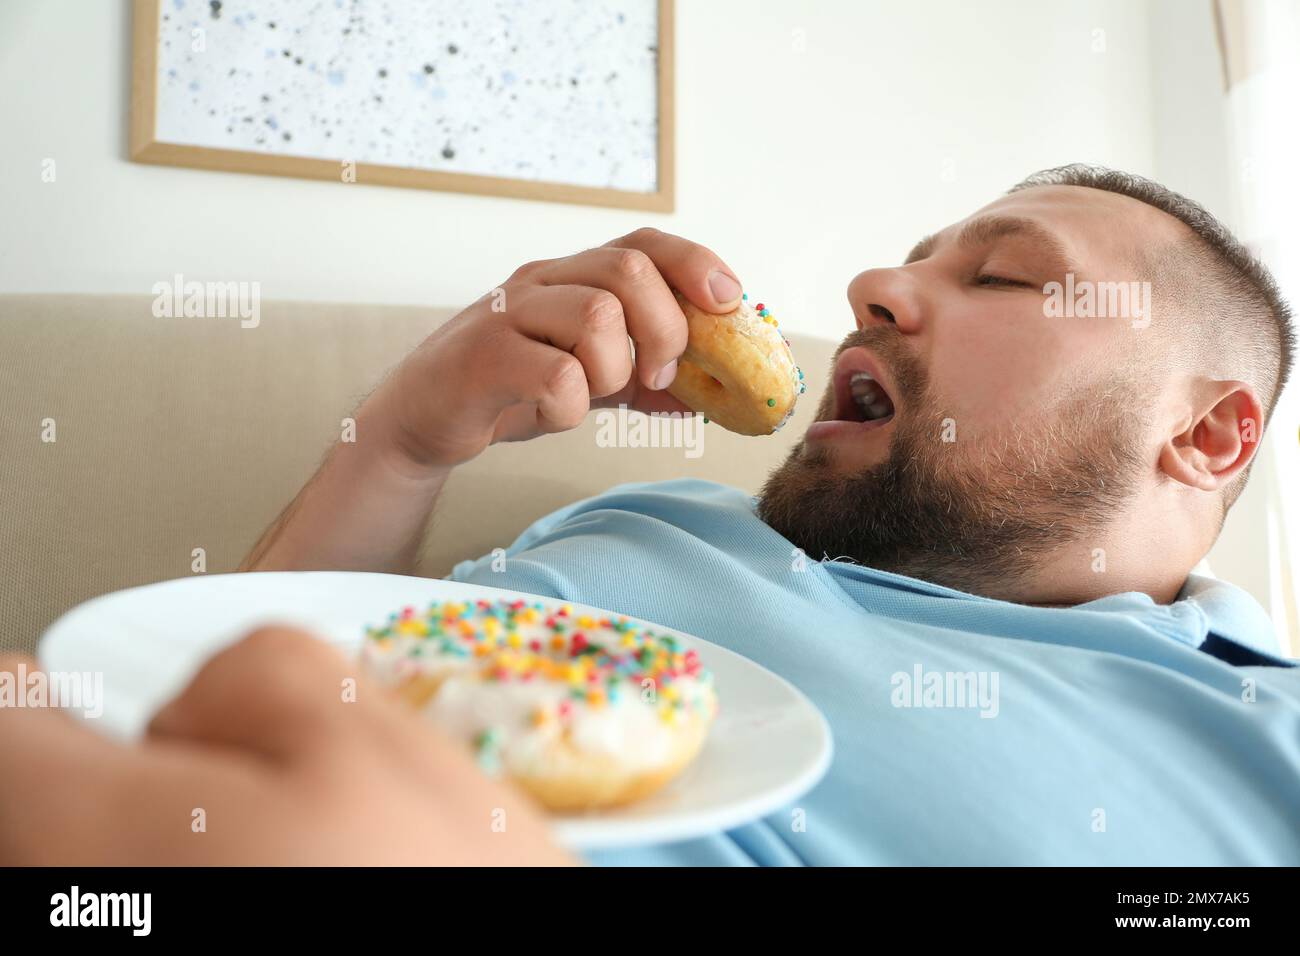 Lazy overweight man eating donuts at home, closeup Stock Photo